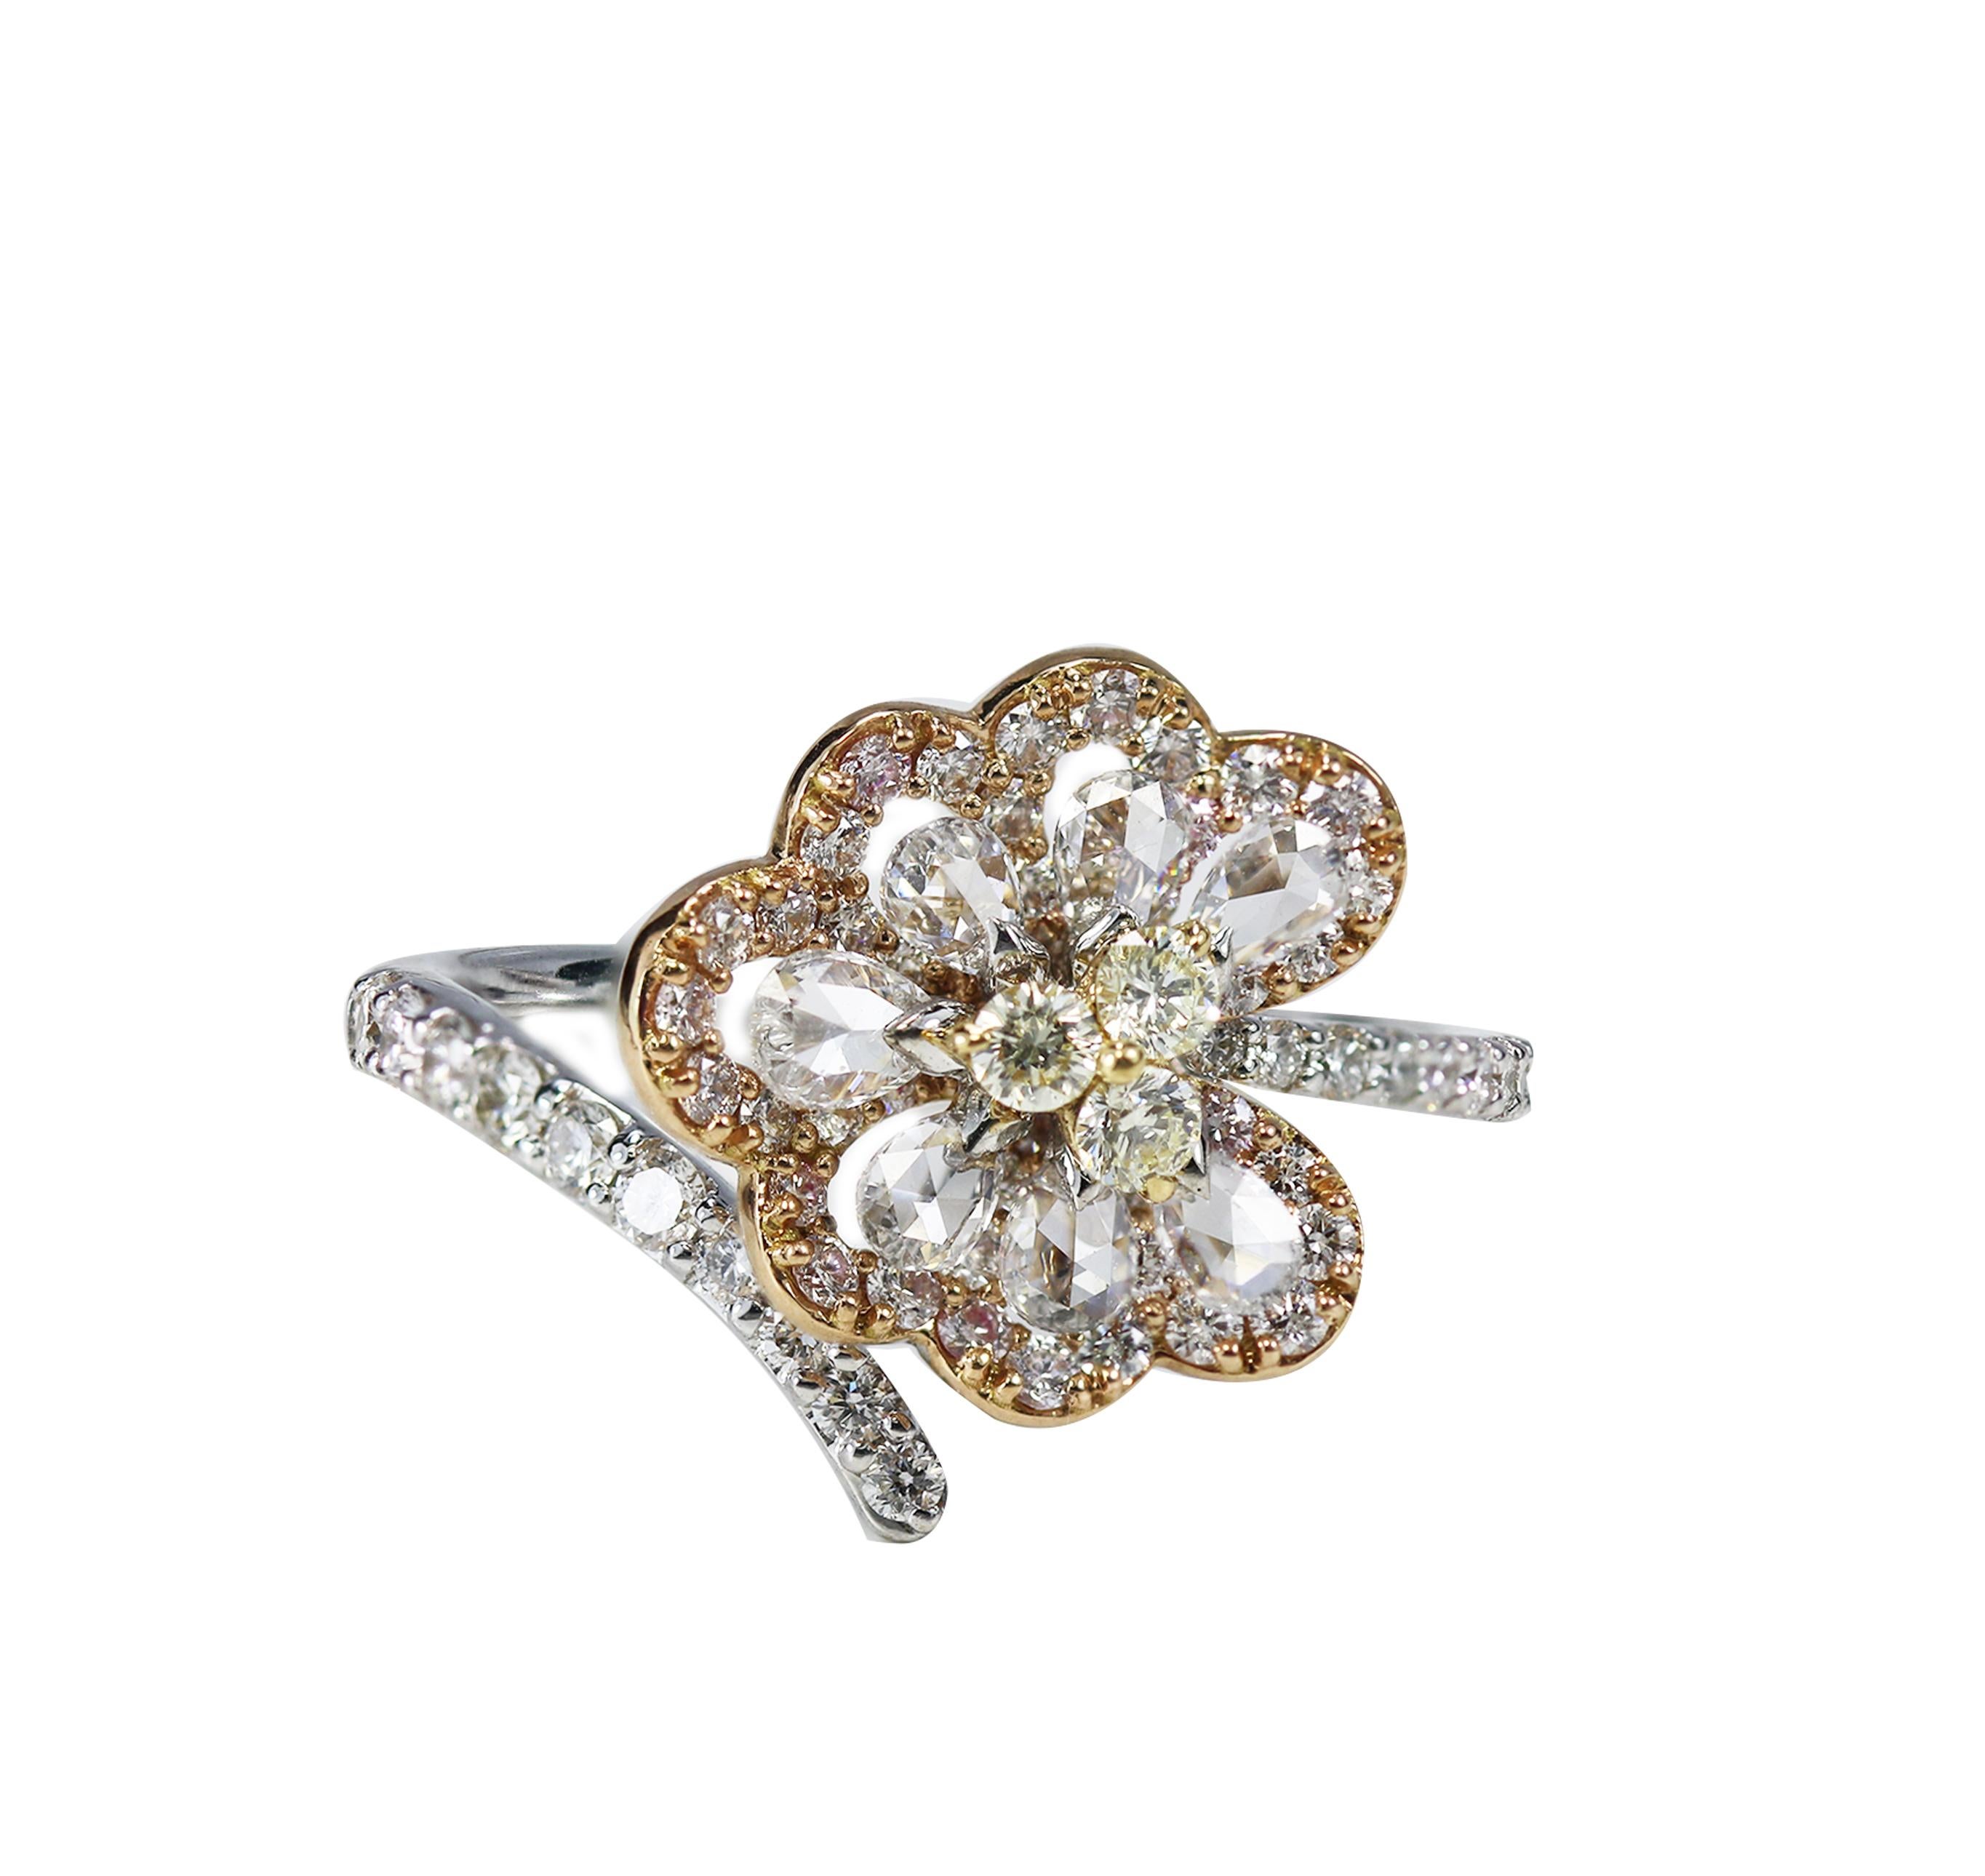 White and yellow diamond ring

A unique design results in this captivating 18K white, yellow and rose gold ring featuring pear rosecut and round brilliant cut white and yellow diamonds delicately set in a drill and prong setting. Statement-making